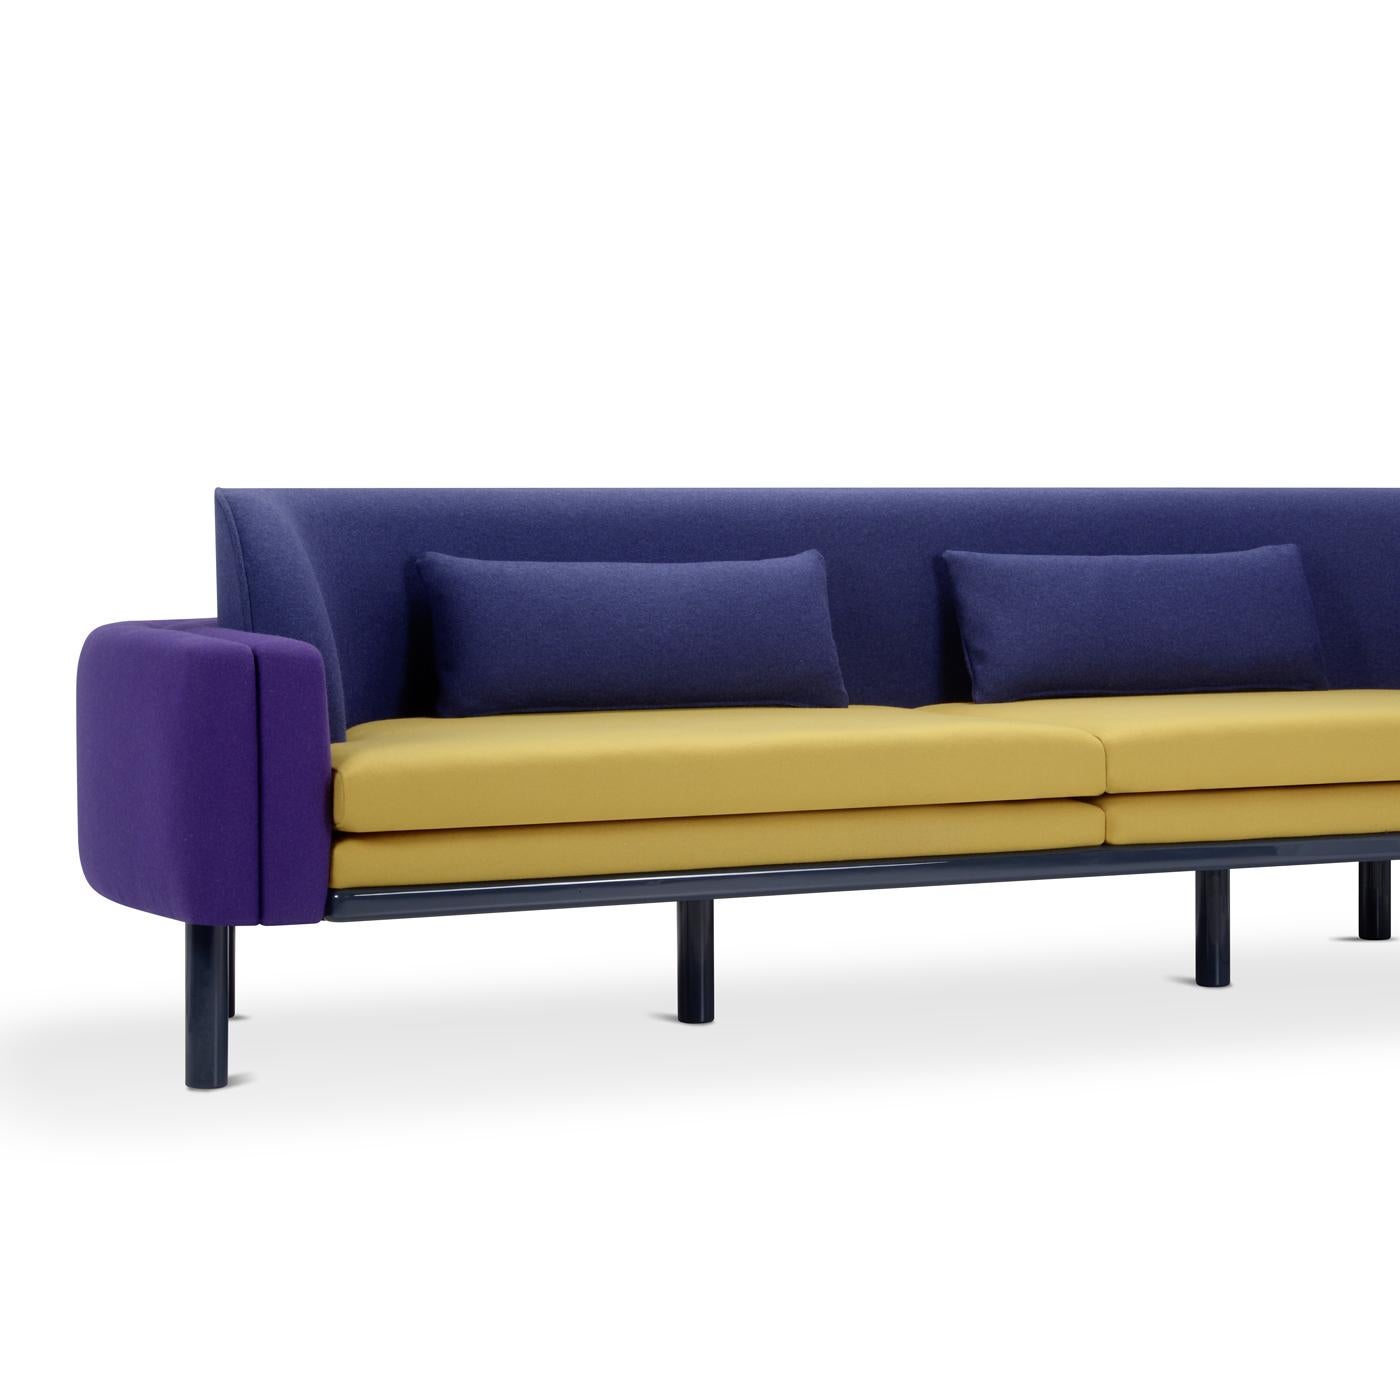 With striking visual impact, the mercury sofa is inspired by the avant-garde artistic movements of the early 1900s. The base in painted beechwood matches the padded and upholstered seat, back and armrests. The combination of fabrics colors is almost